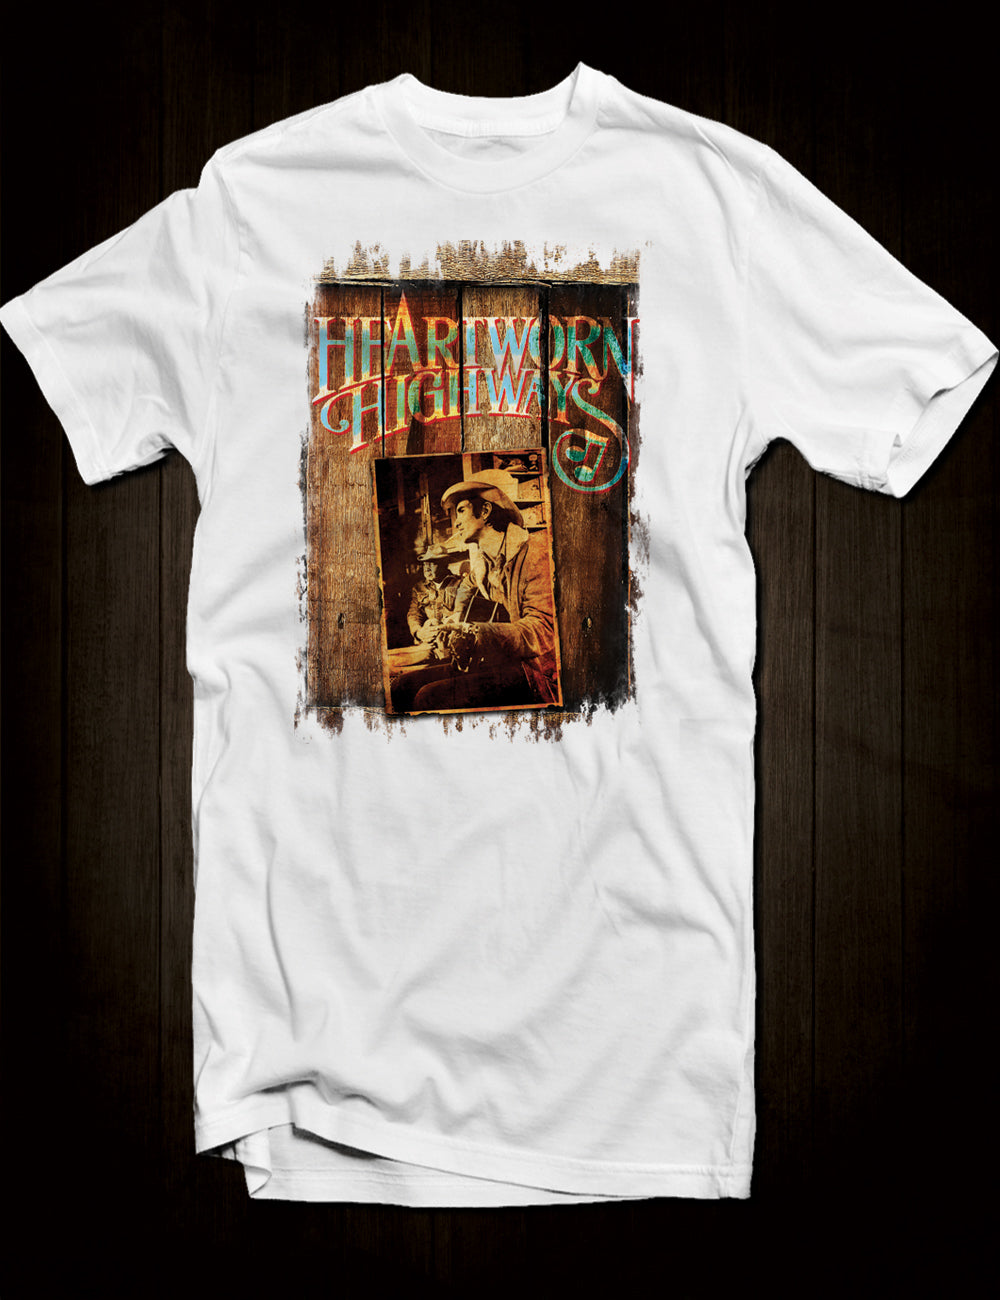 White Heartworn Highways T-Shirt Outlaw Country